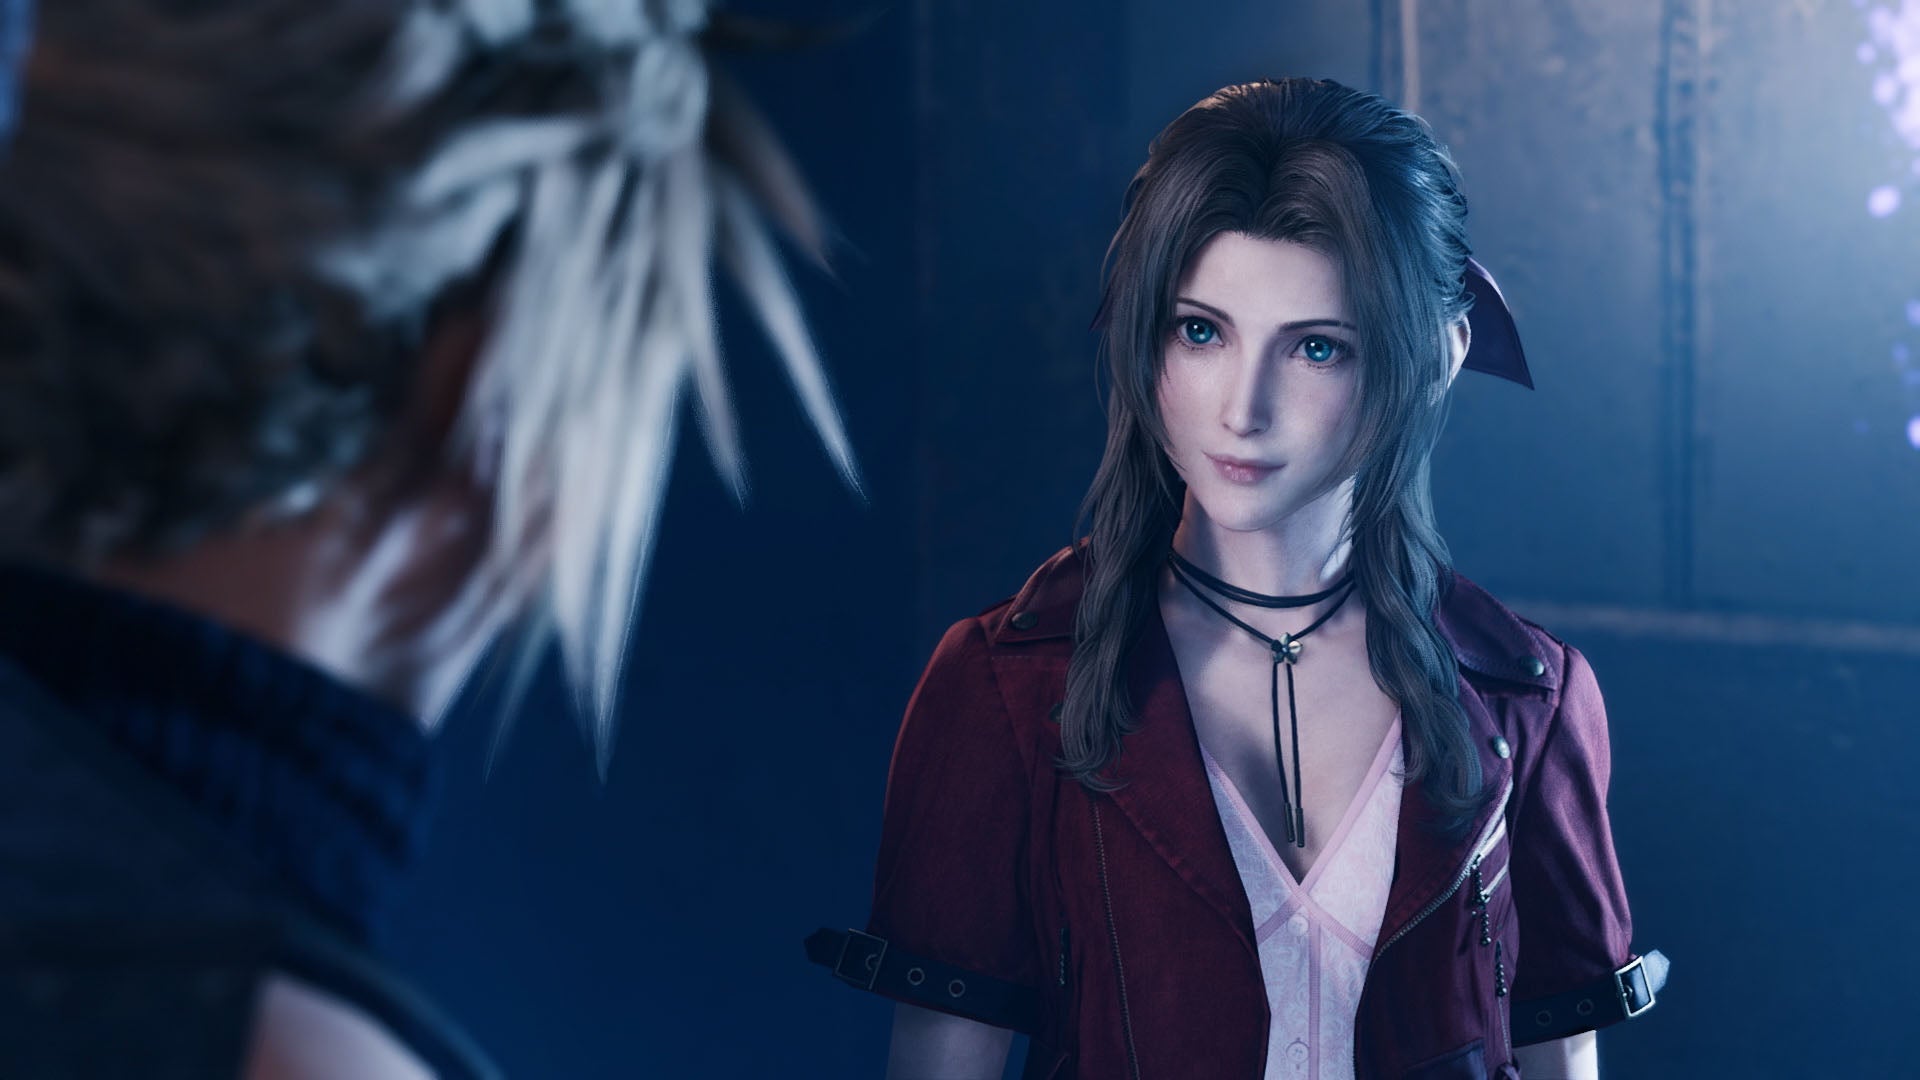 Image for You're going to want this Final Fantasy 7 Remake art book and poster collection